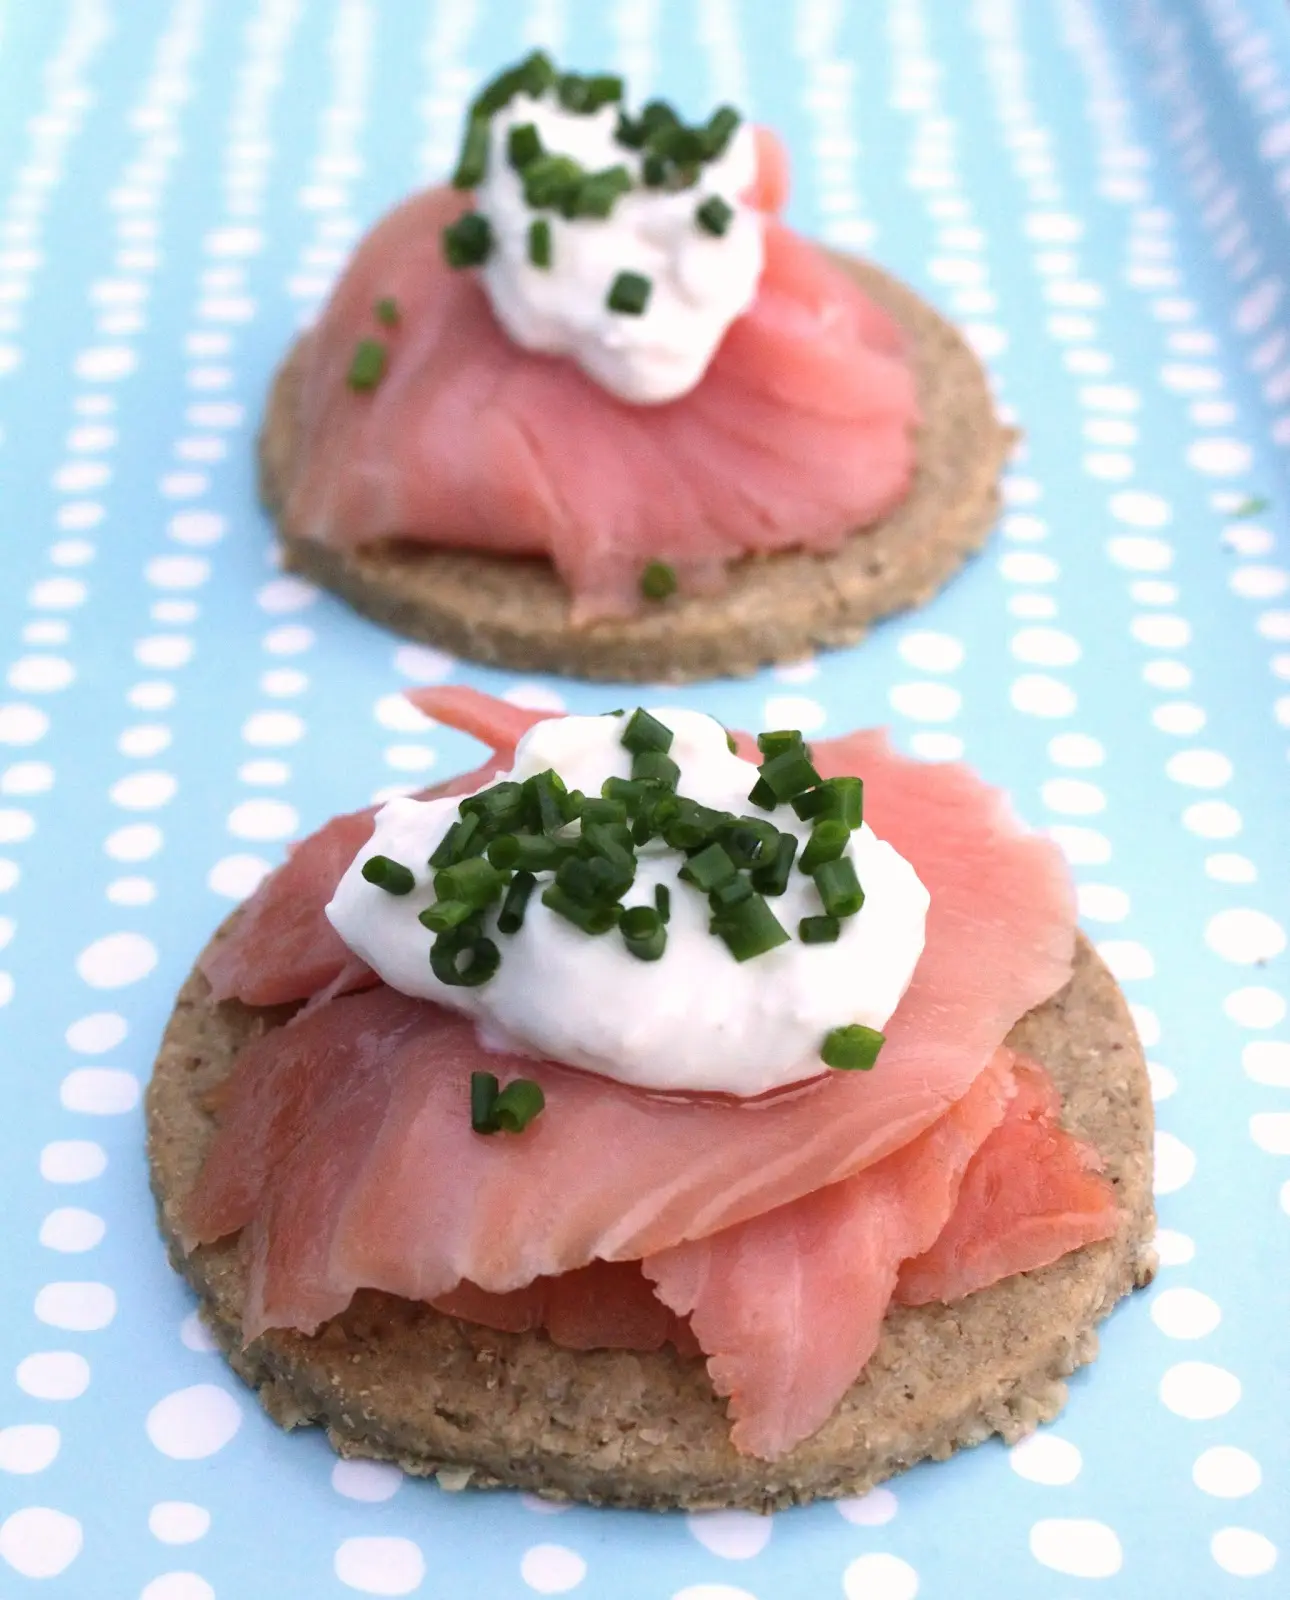 oatcakes and smoked salmon - What do you serve with oatcakes